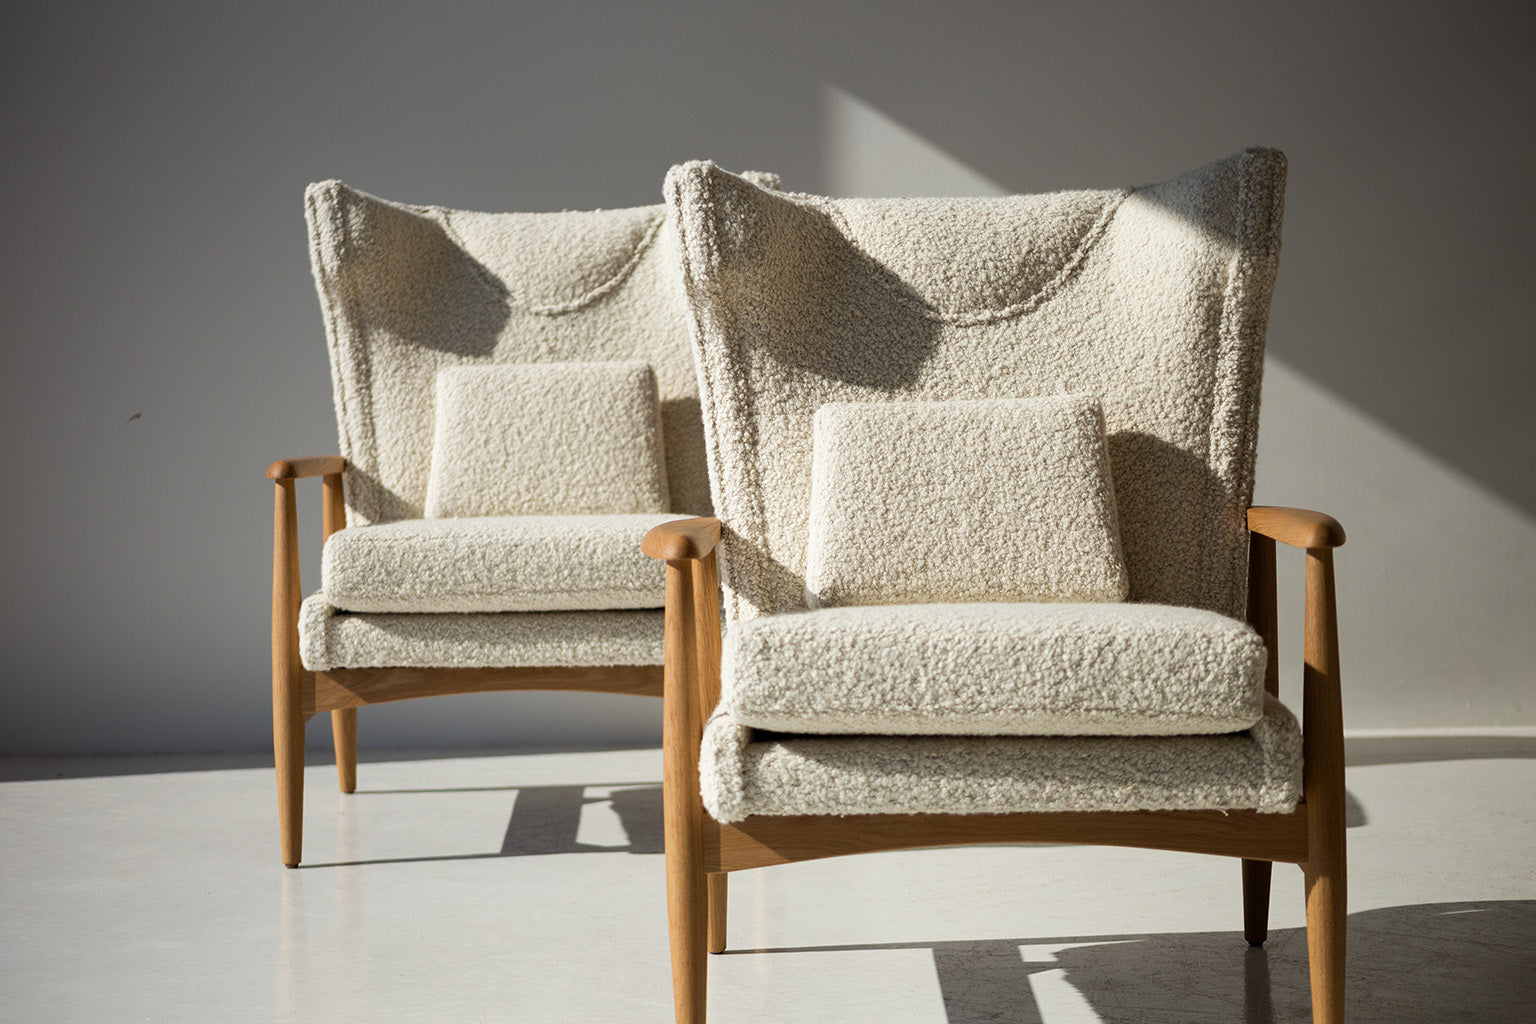      peabody-modern-wing-chair-iboucle-2012p-07